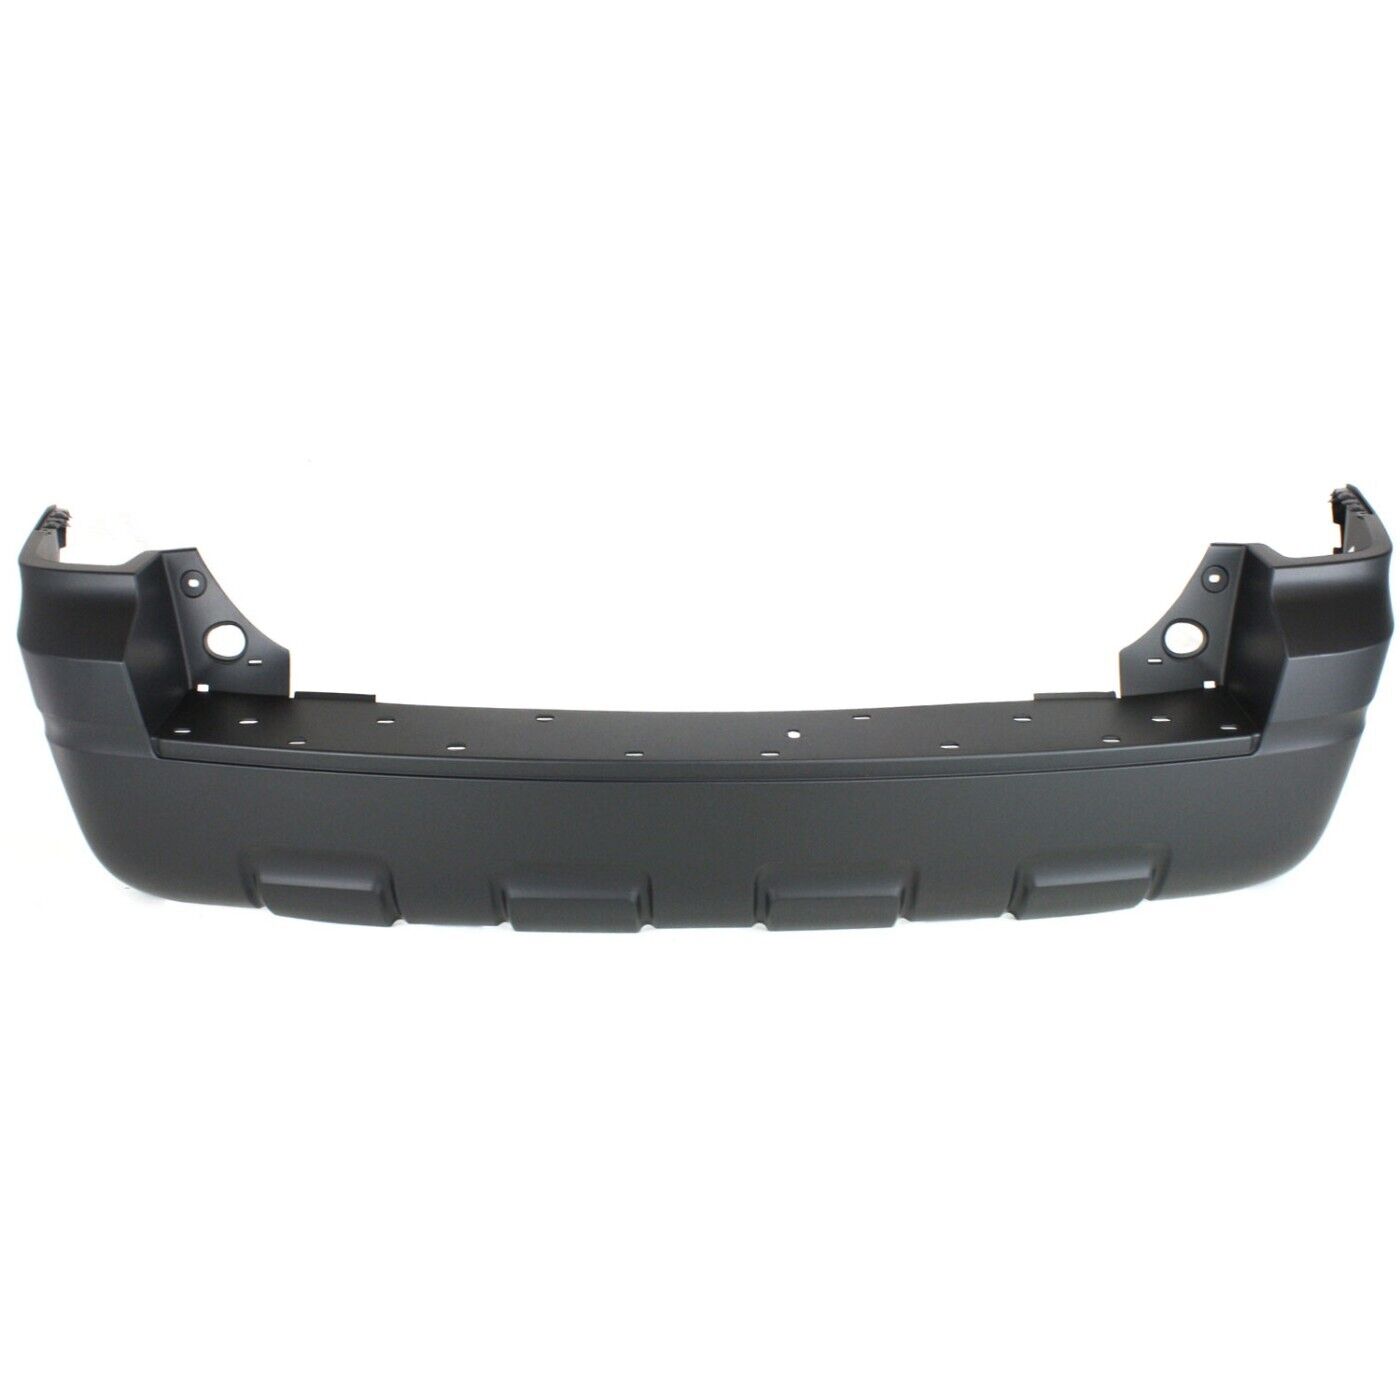 Rear Bumper Cover For 2008-2012 Ford Escape With Step Pad Provision Primed